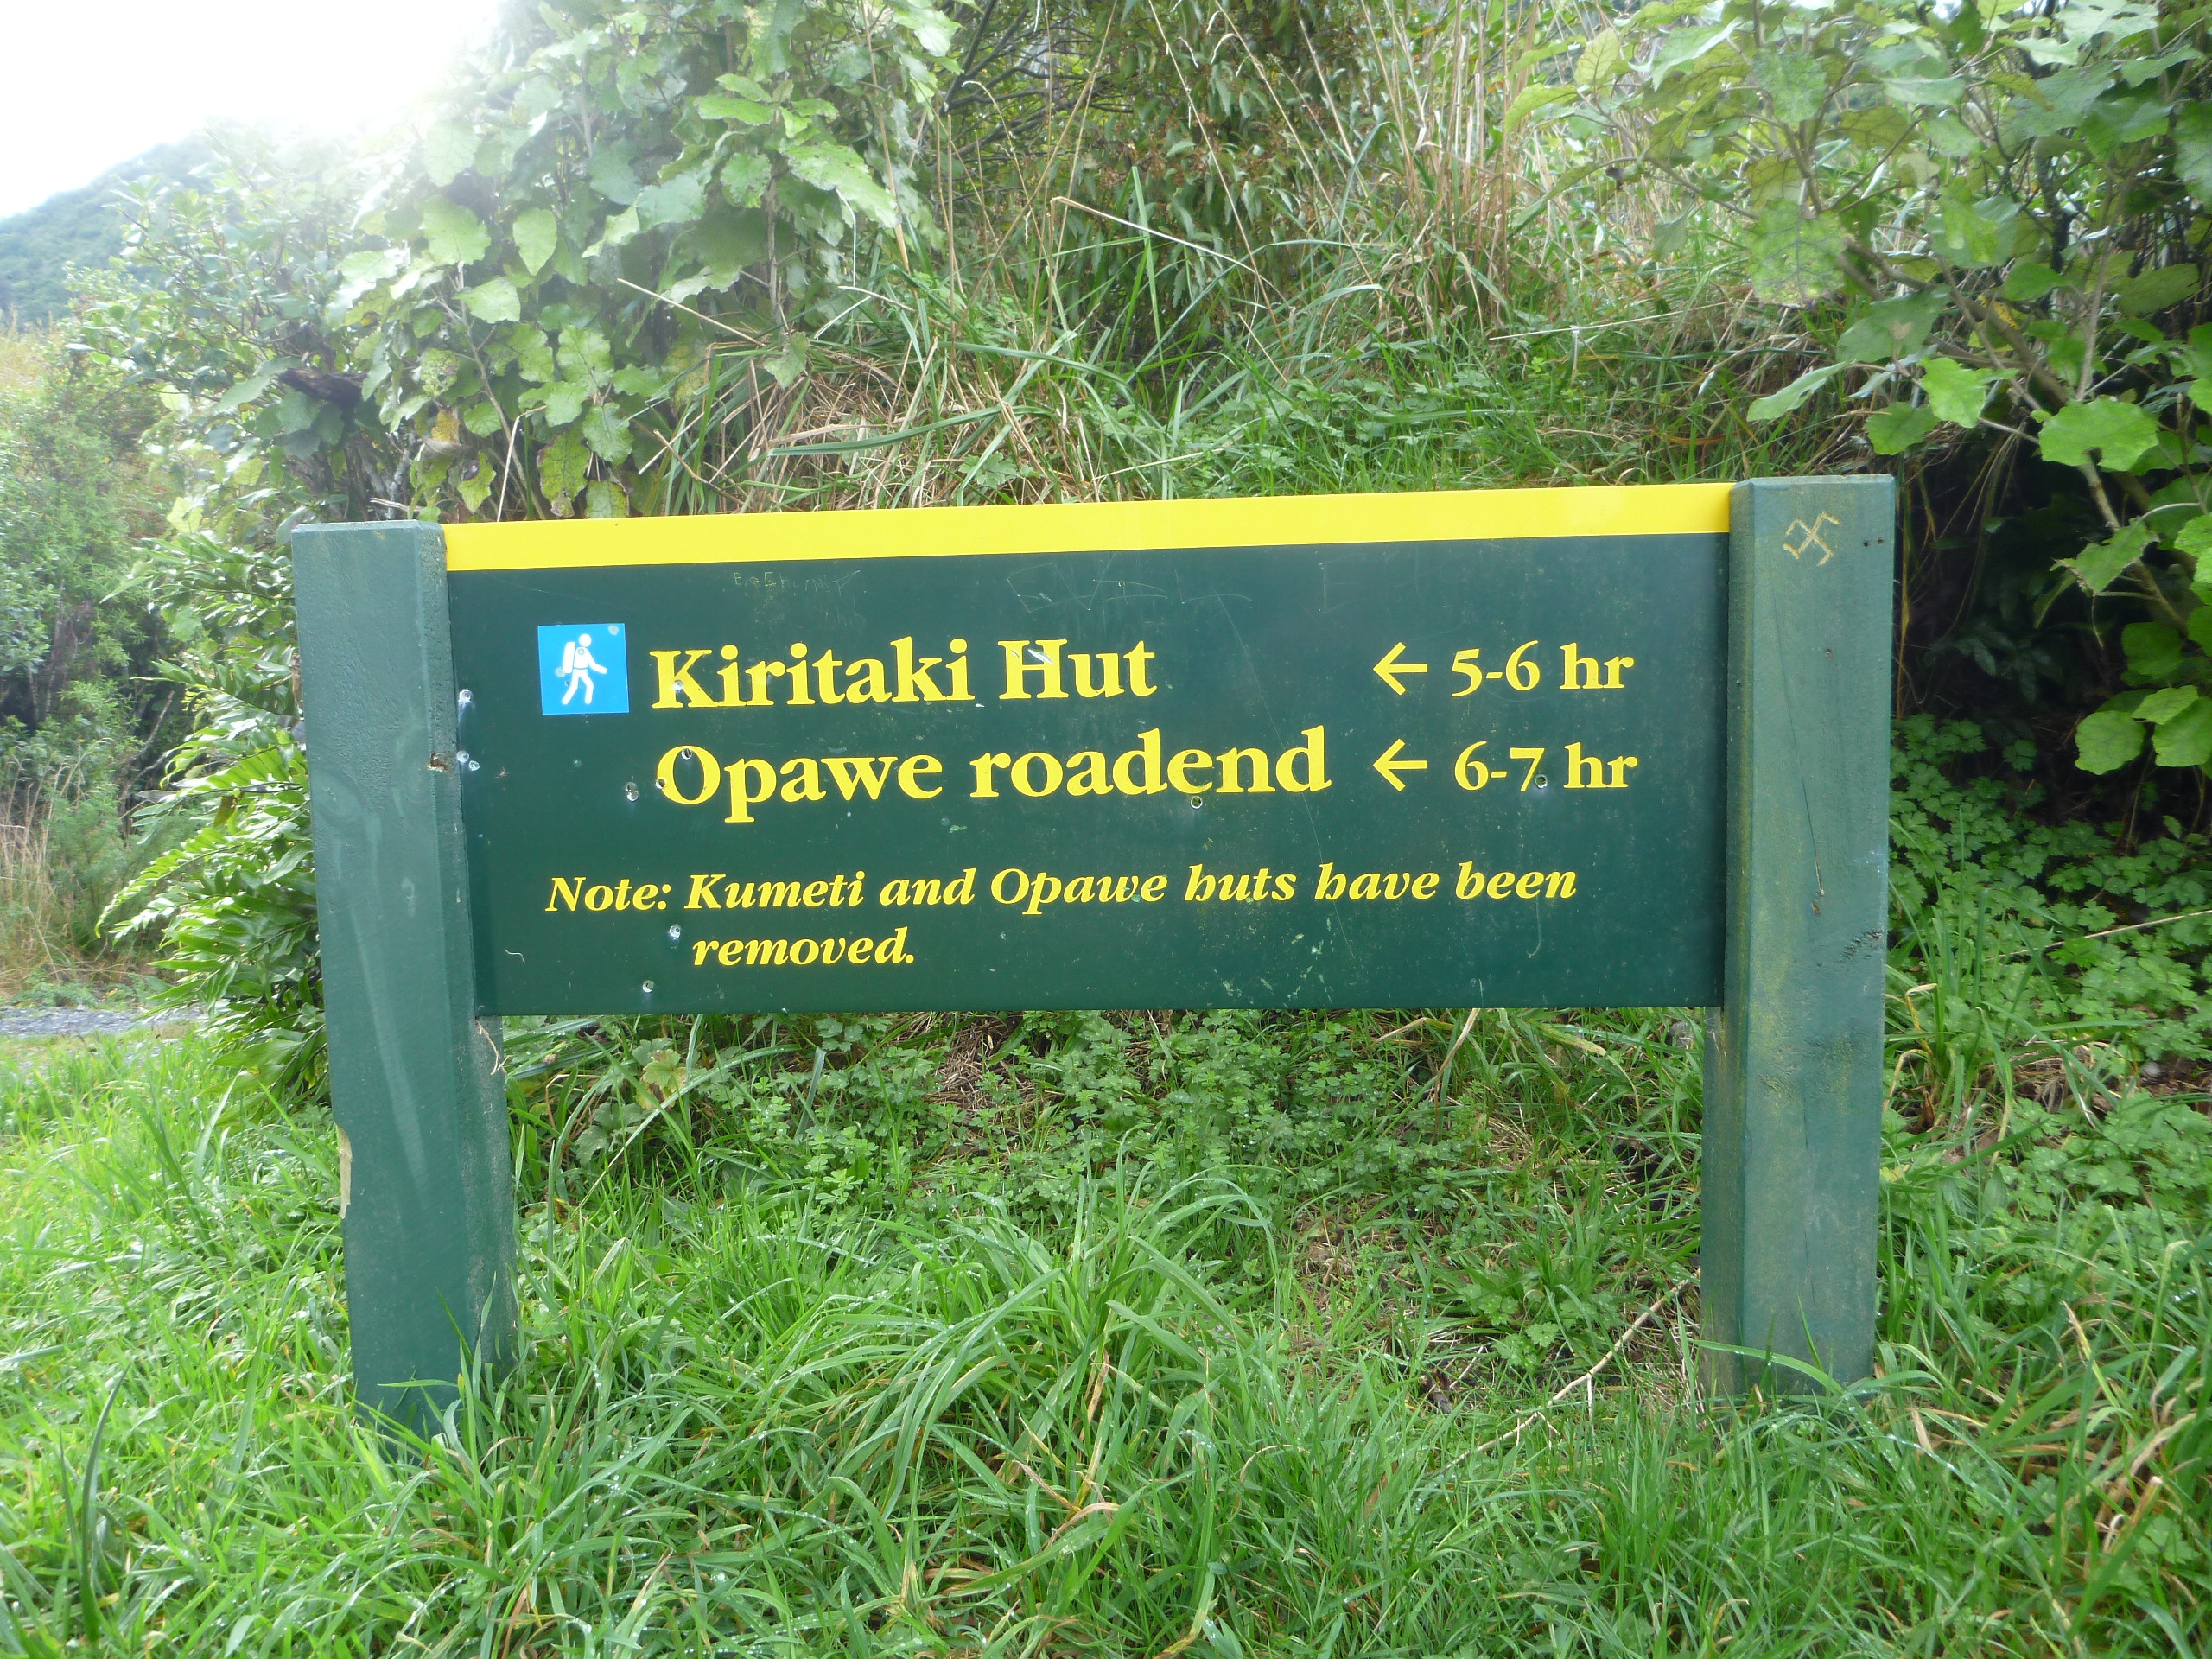 We did the crossing from Opawe to Kumeti in 5 hours